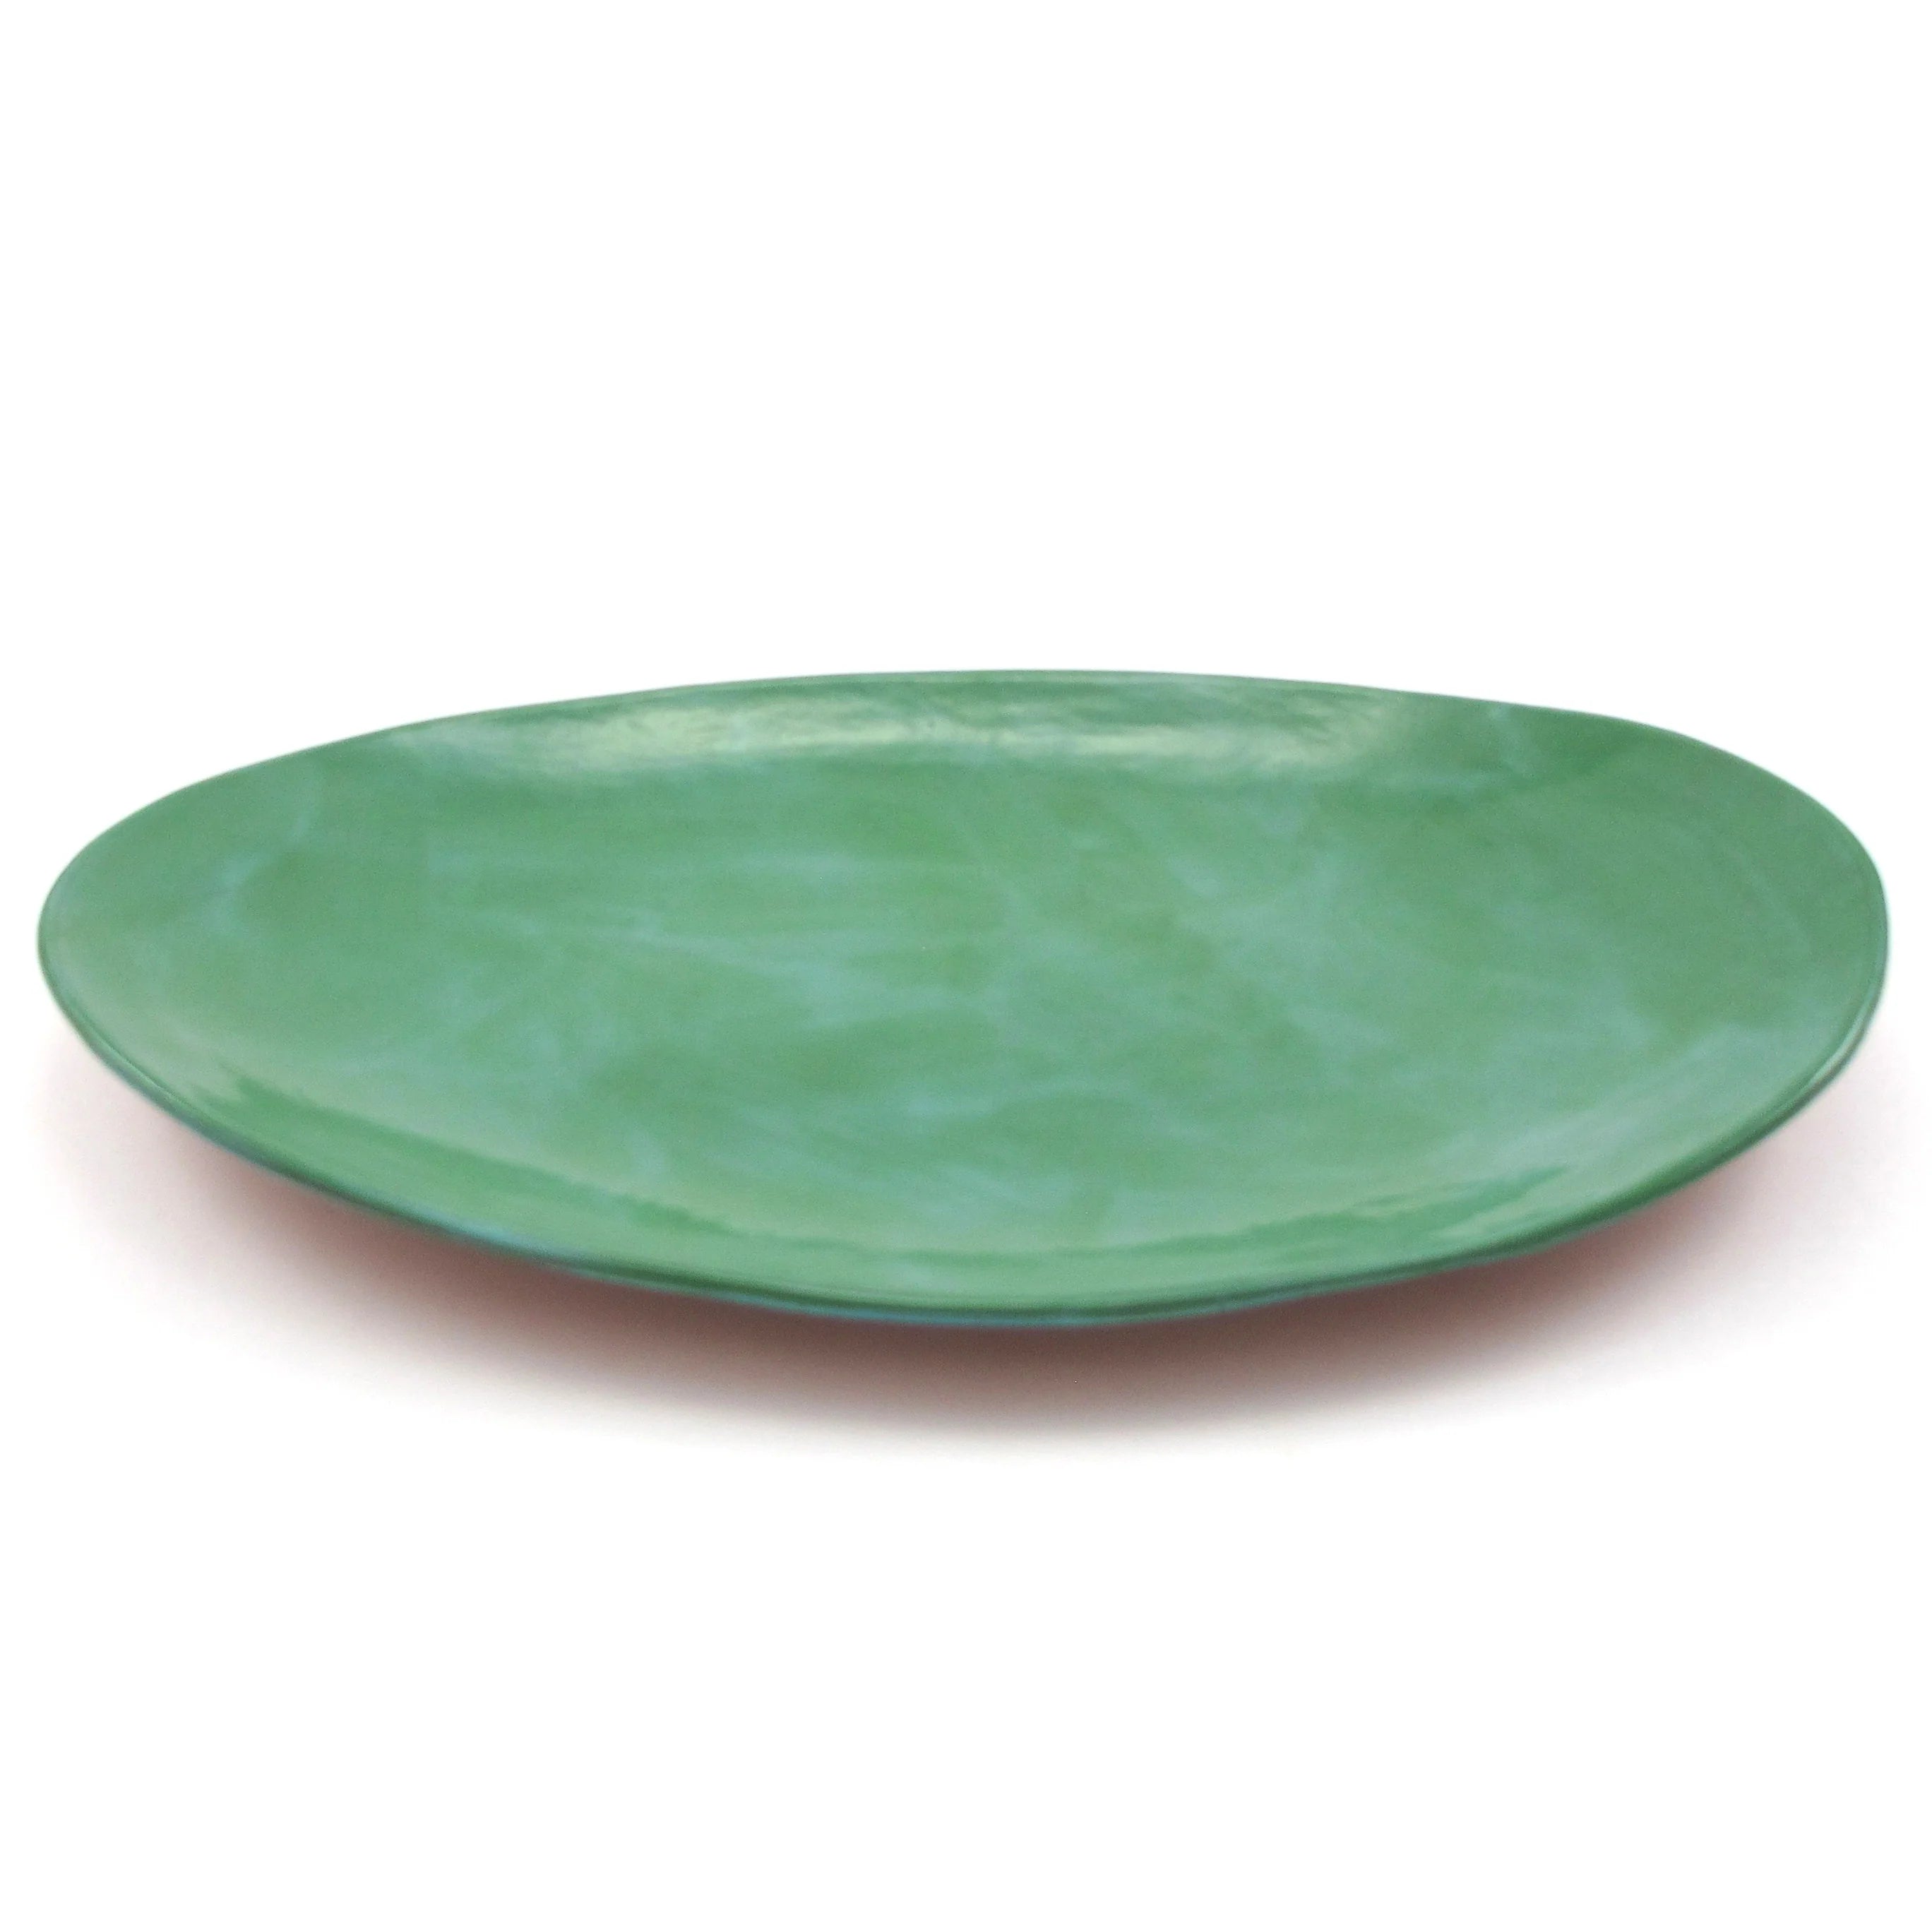 Oval Platter | First quality